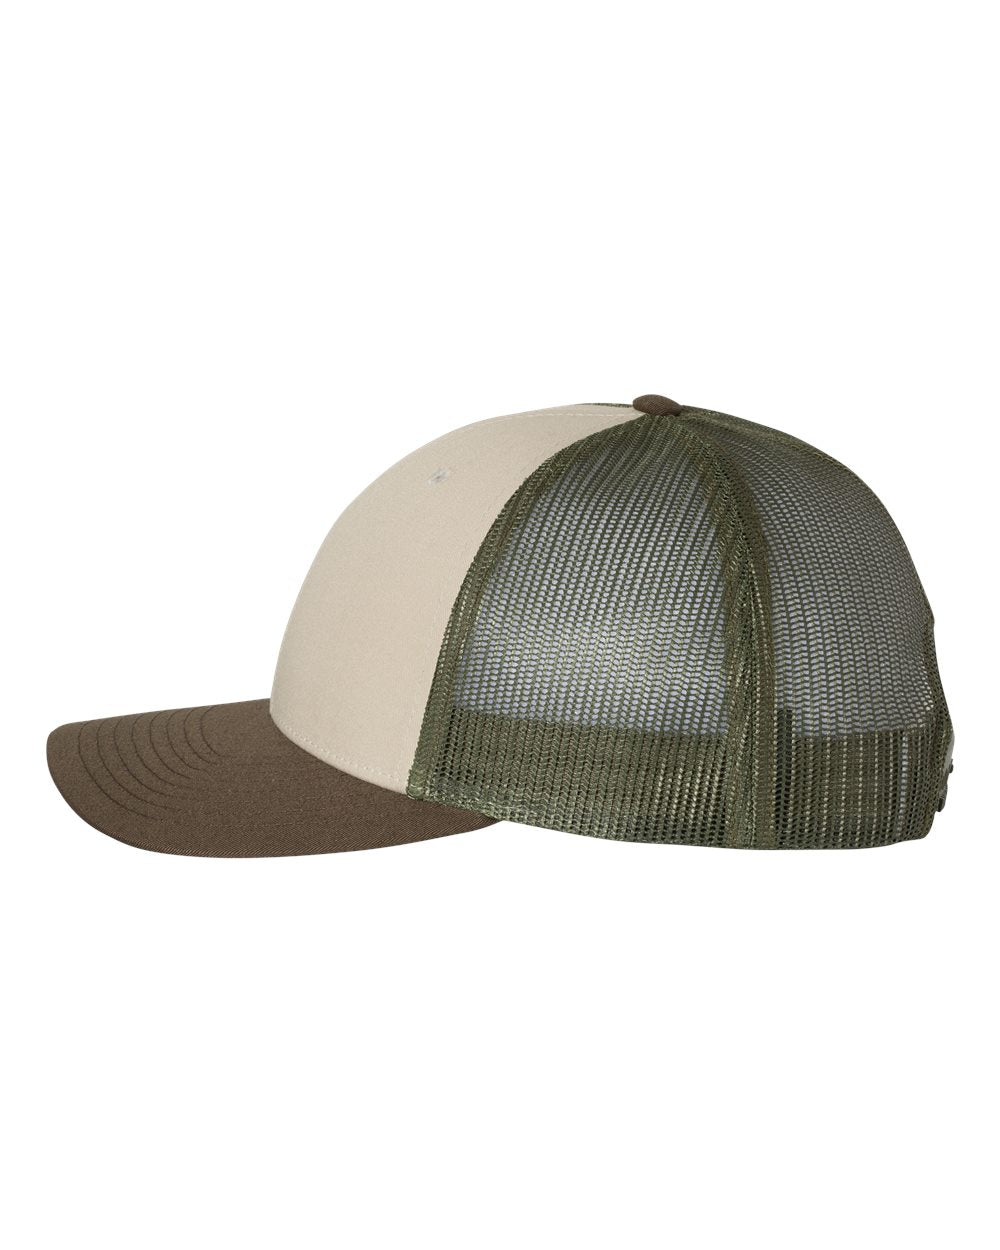 A Richardson Low Pro Trucker Hat in tan, loden, and brown, featuring an embroidered Montana steer silhouette.